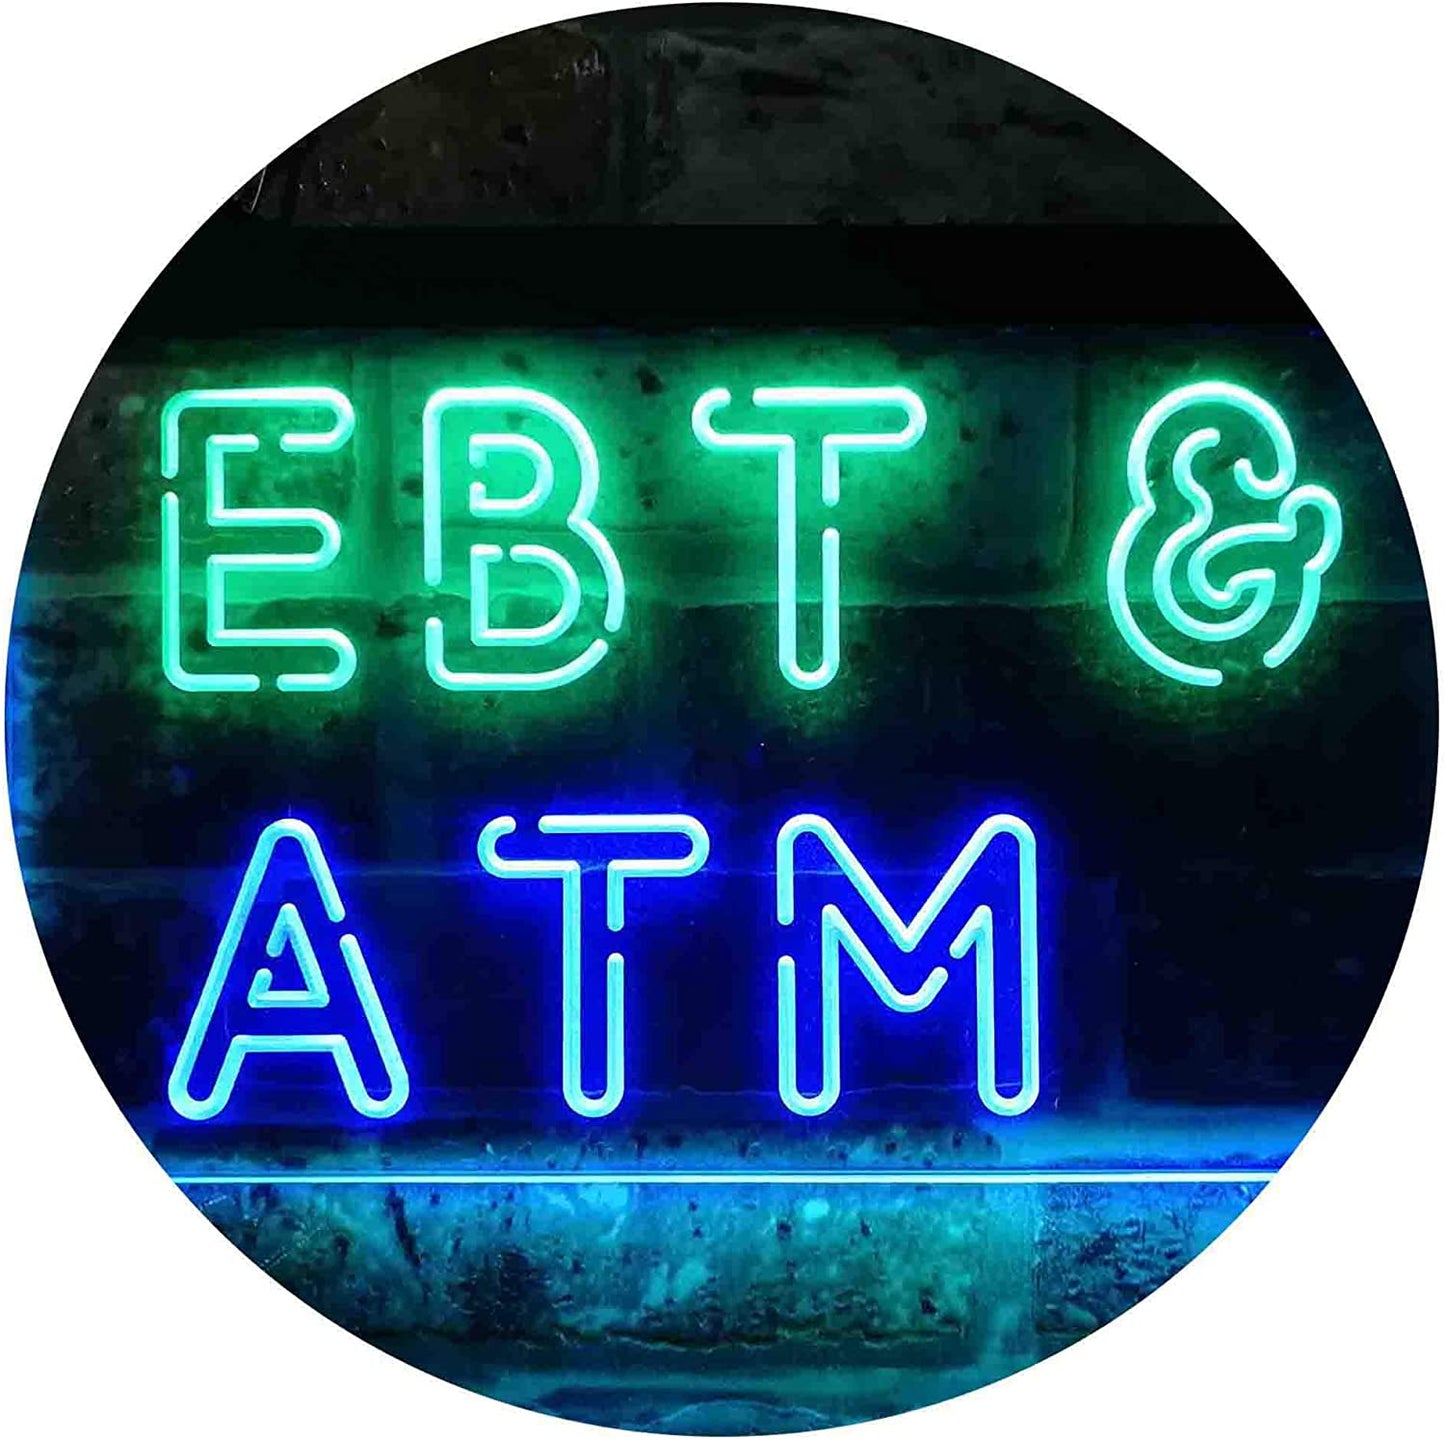 EBT & ATM LED Neon Light Sign - Way Up Gifts